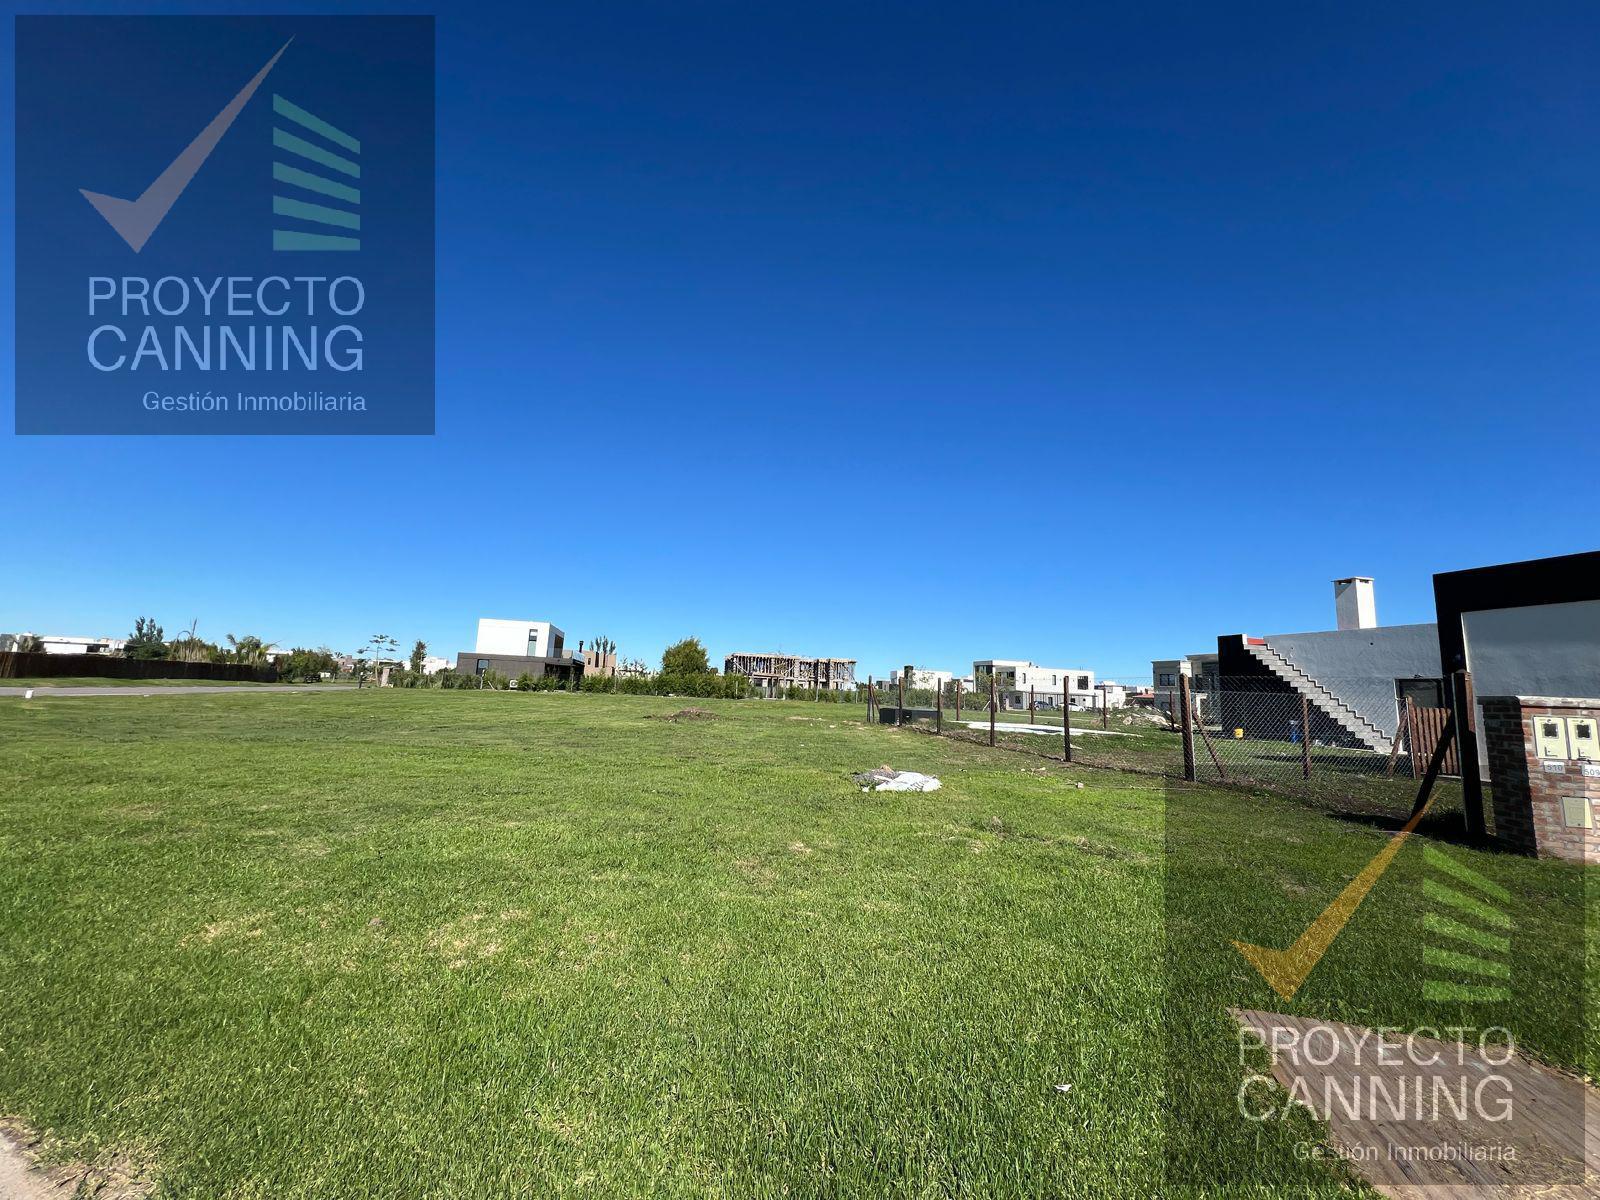 #5047917 | Venta | Lote | Canning (Proyecto Canning)